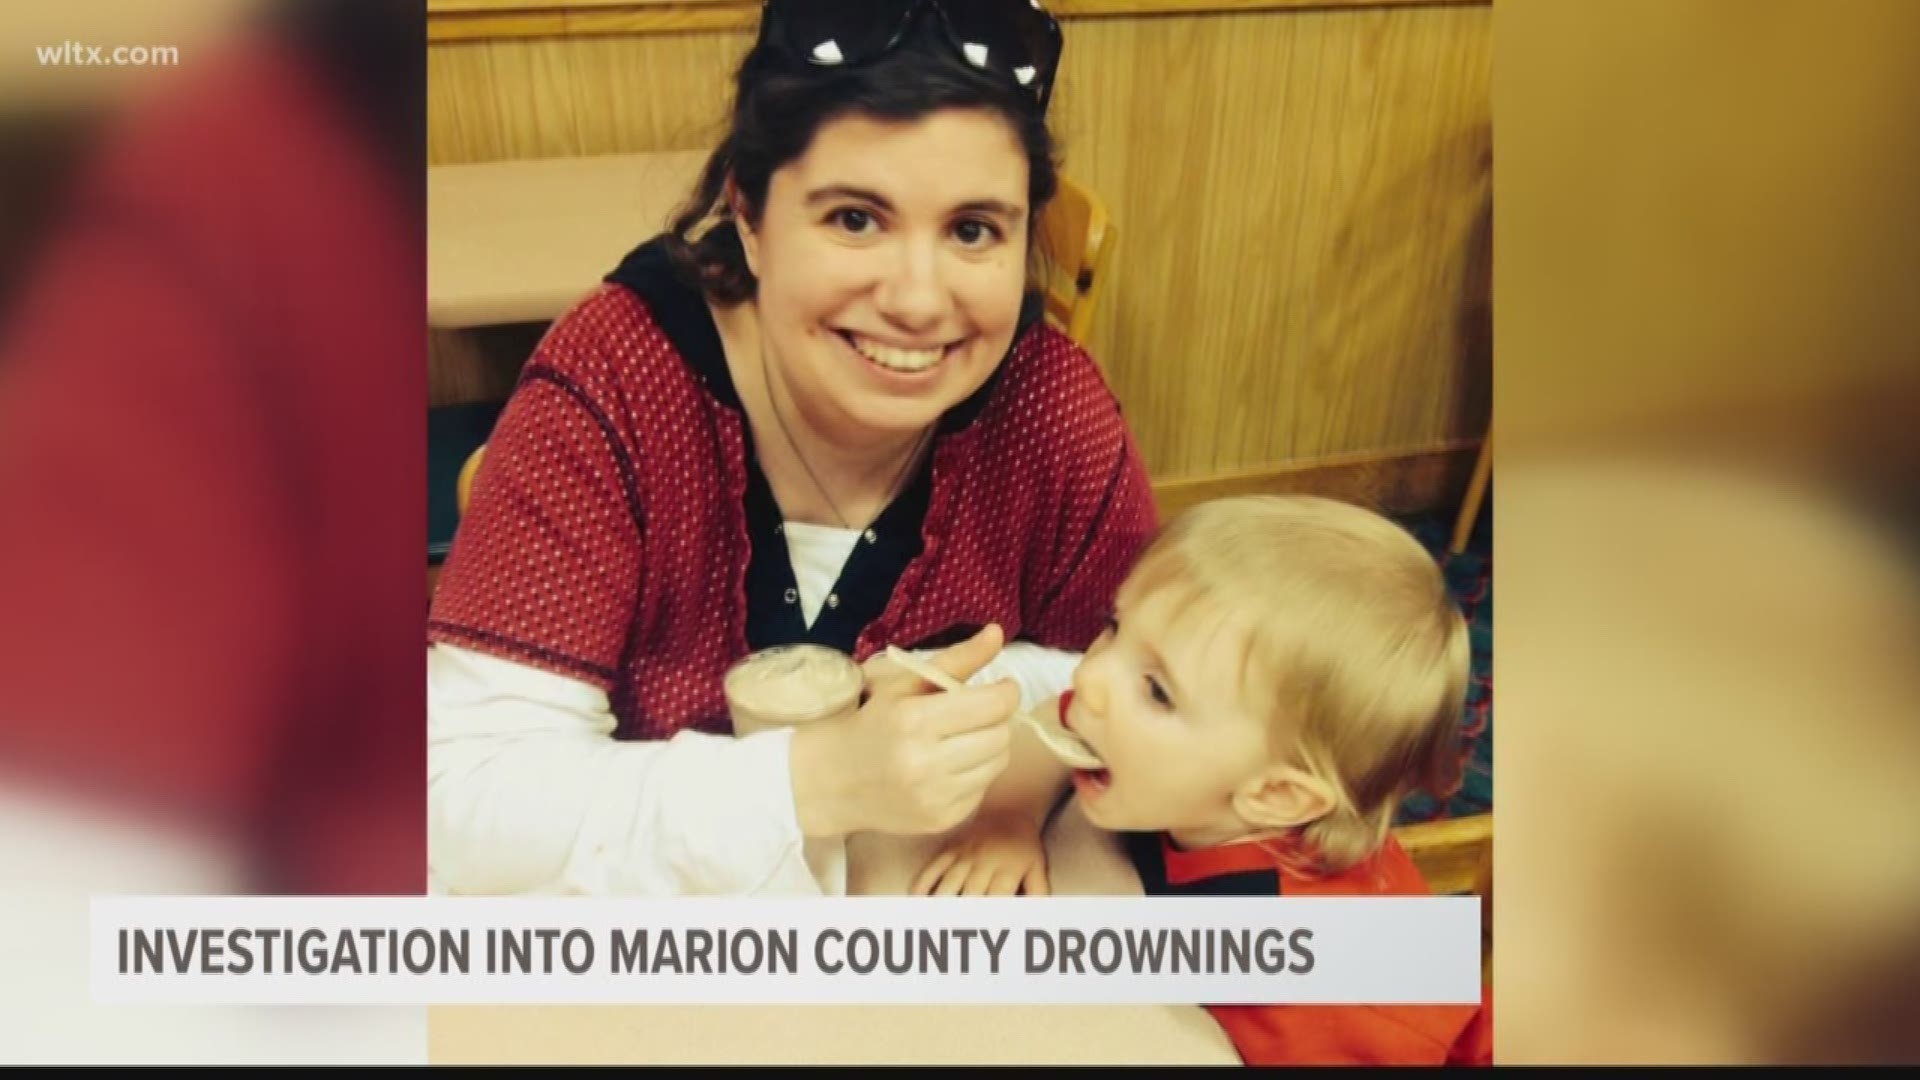 An investigation into the drowning of two women in Marion county following Hurricane Florence remains under investigation.